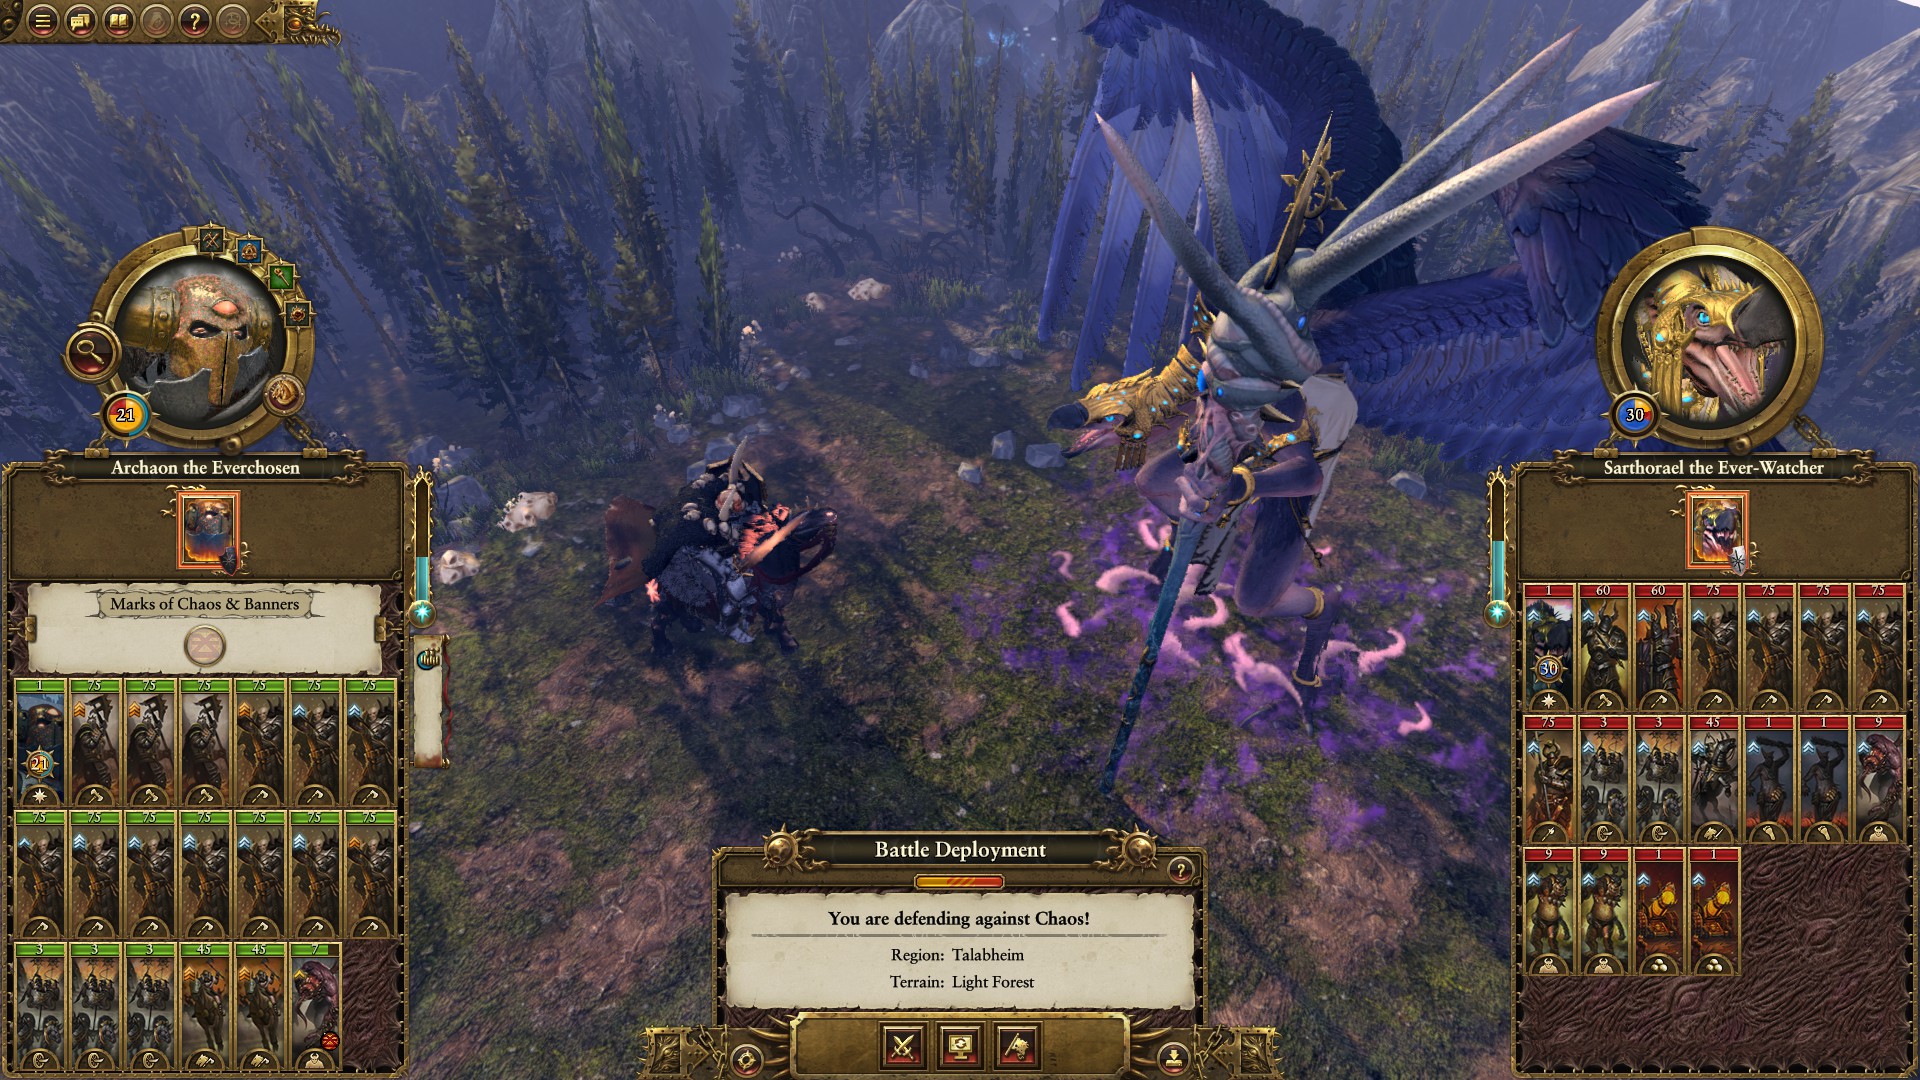 The Auto Resolve option in Total War Warhammer has been widely panned. 